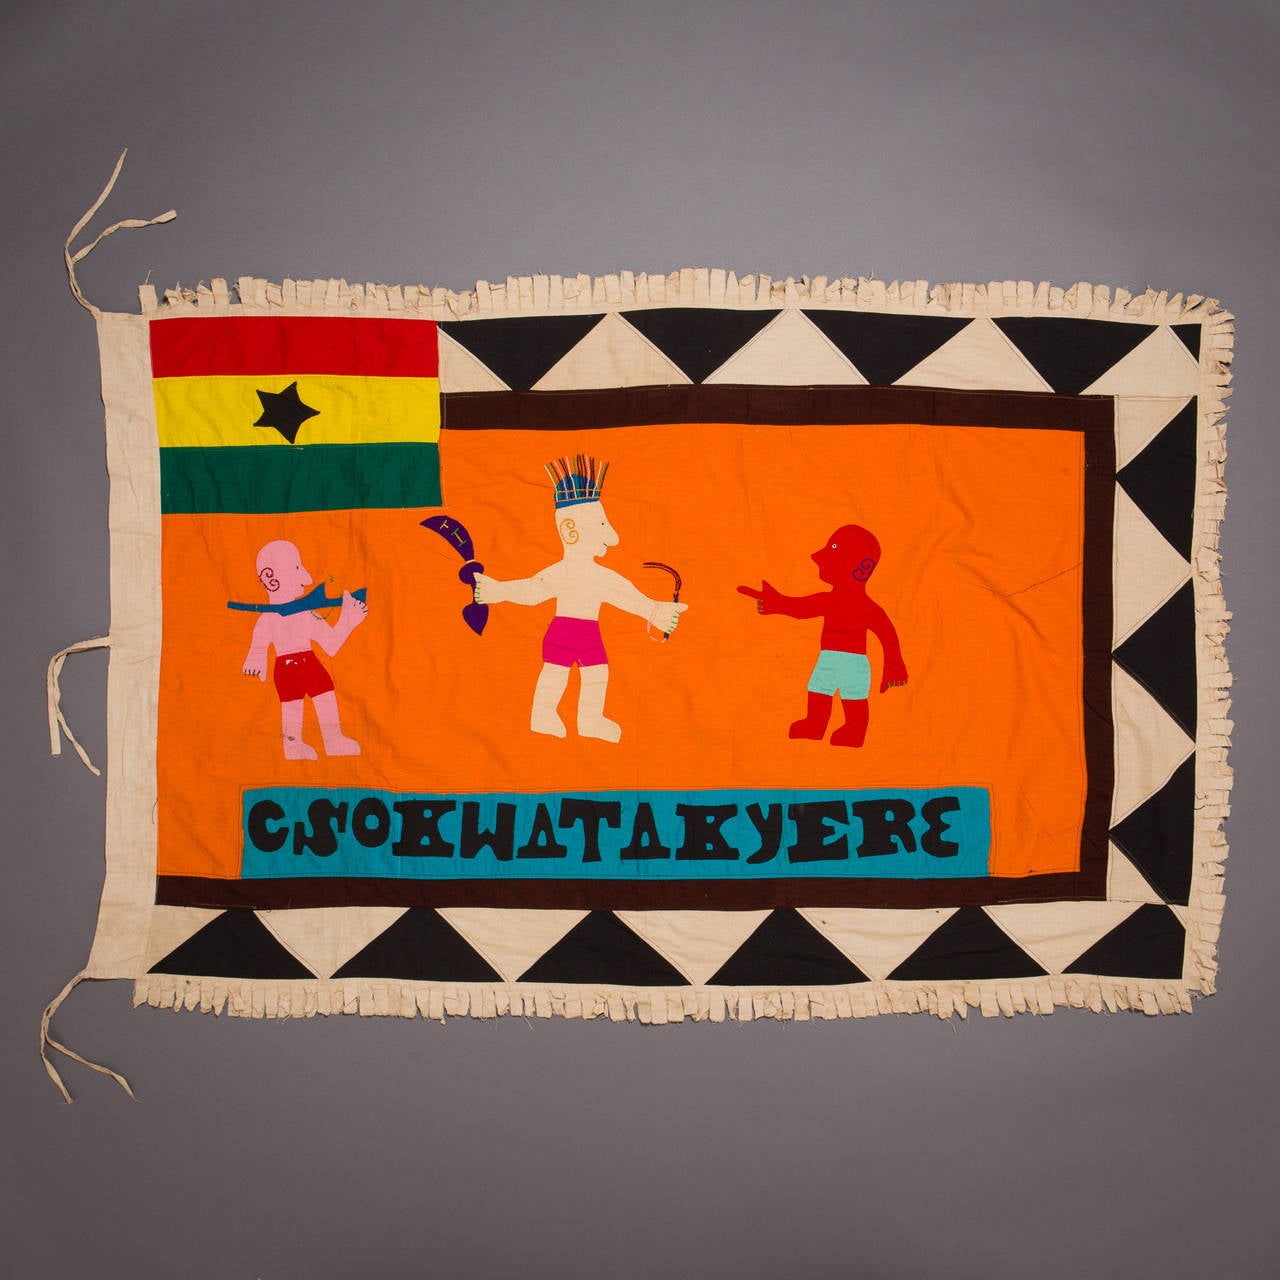 A large and graphically stunning Asafo flag.

Fante flags represent the merger of two cultural traditions, the Akan tradition of combining proverbs with visual imagery and the European heraldic tradition, which used flags and banners displaying